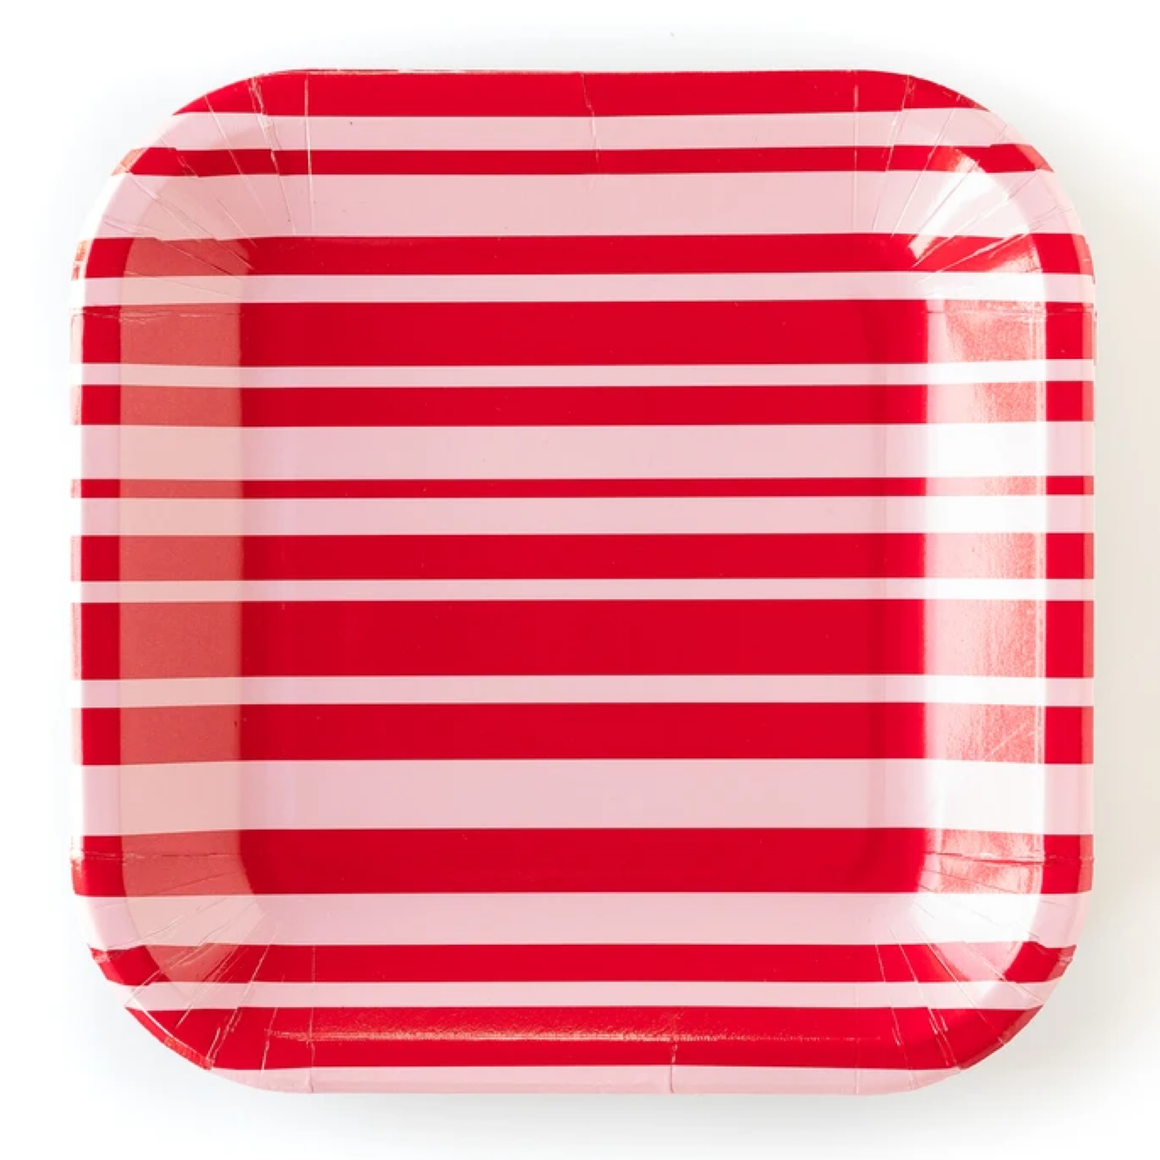 PLATES LARGE - RED & PINK STRIPES